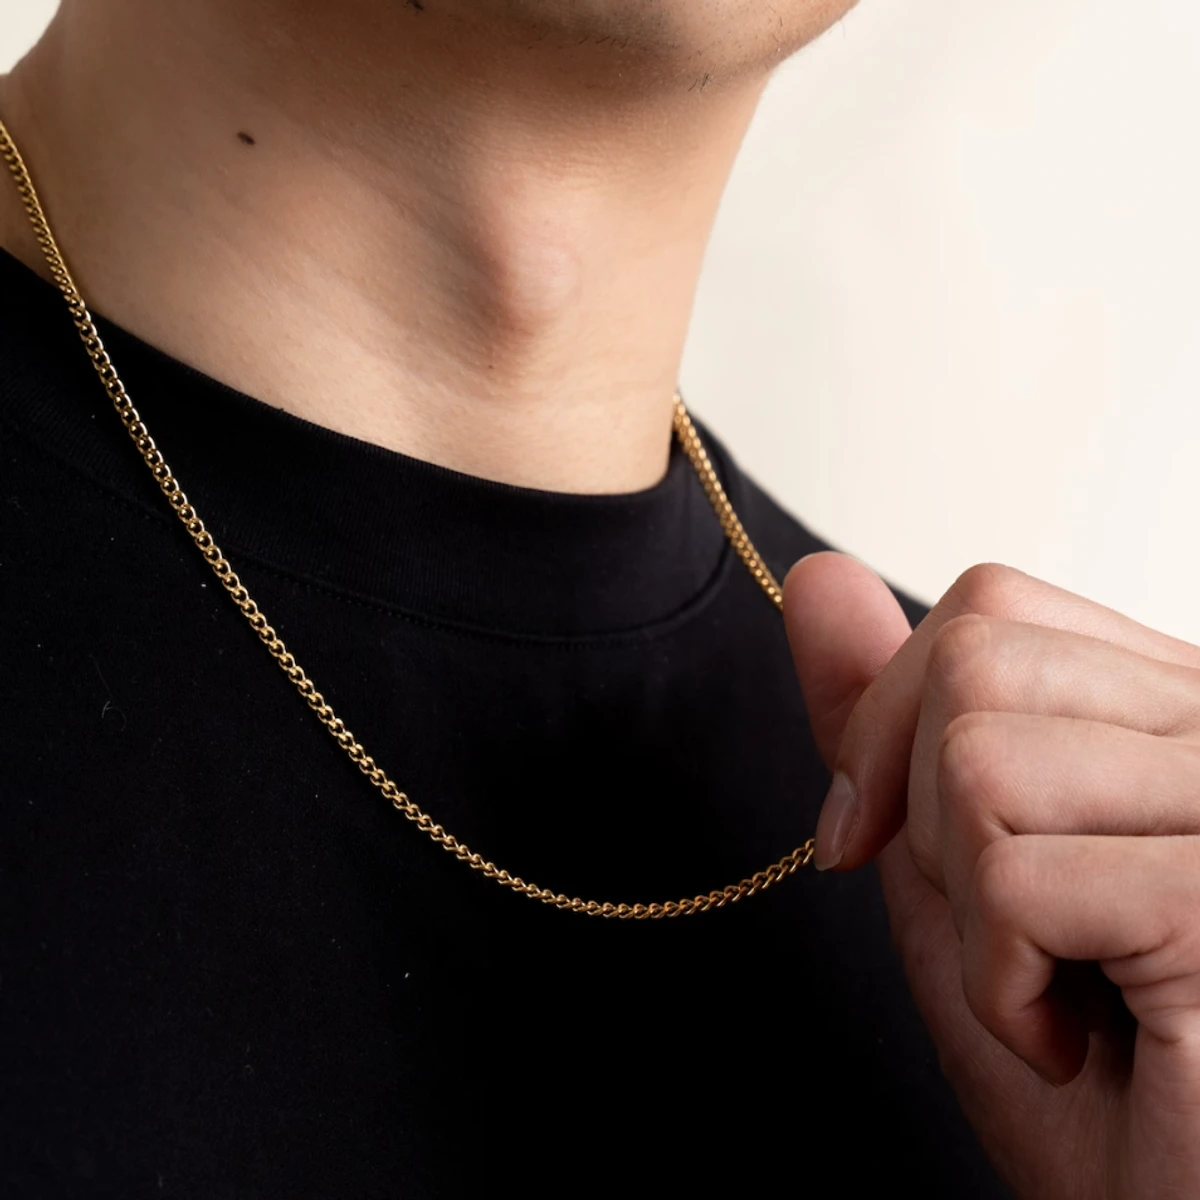 Stainless Steel New Chain Necklace For Men